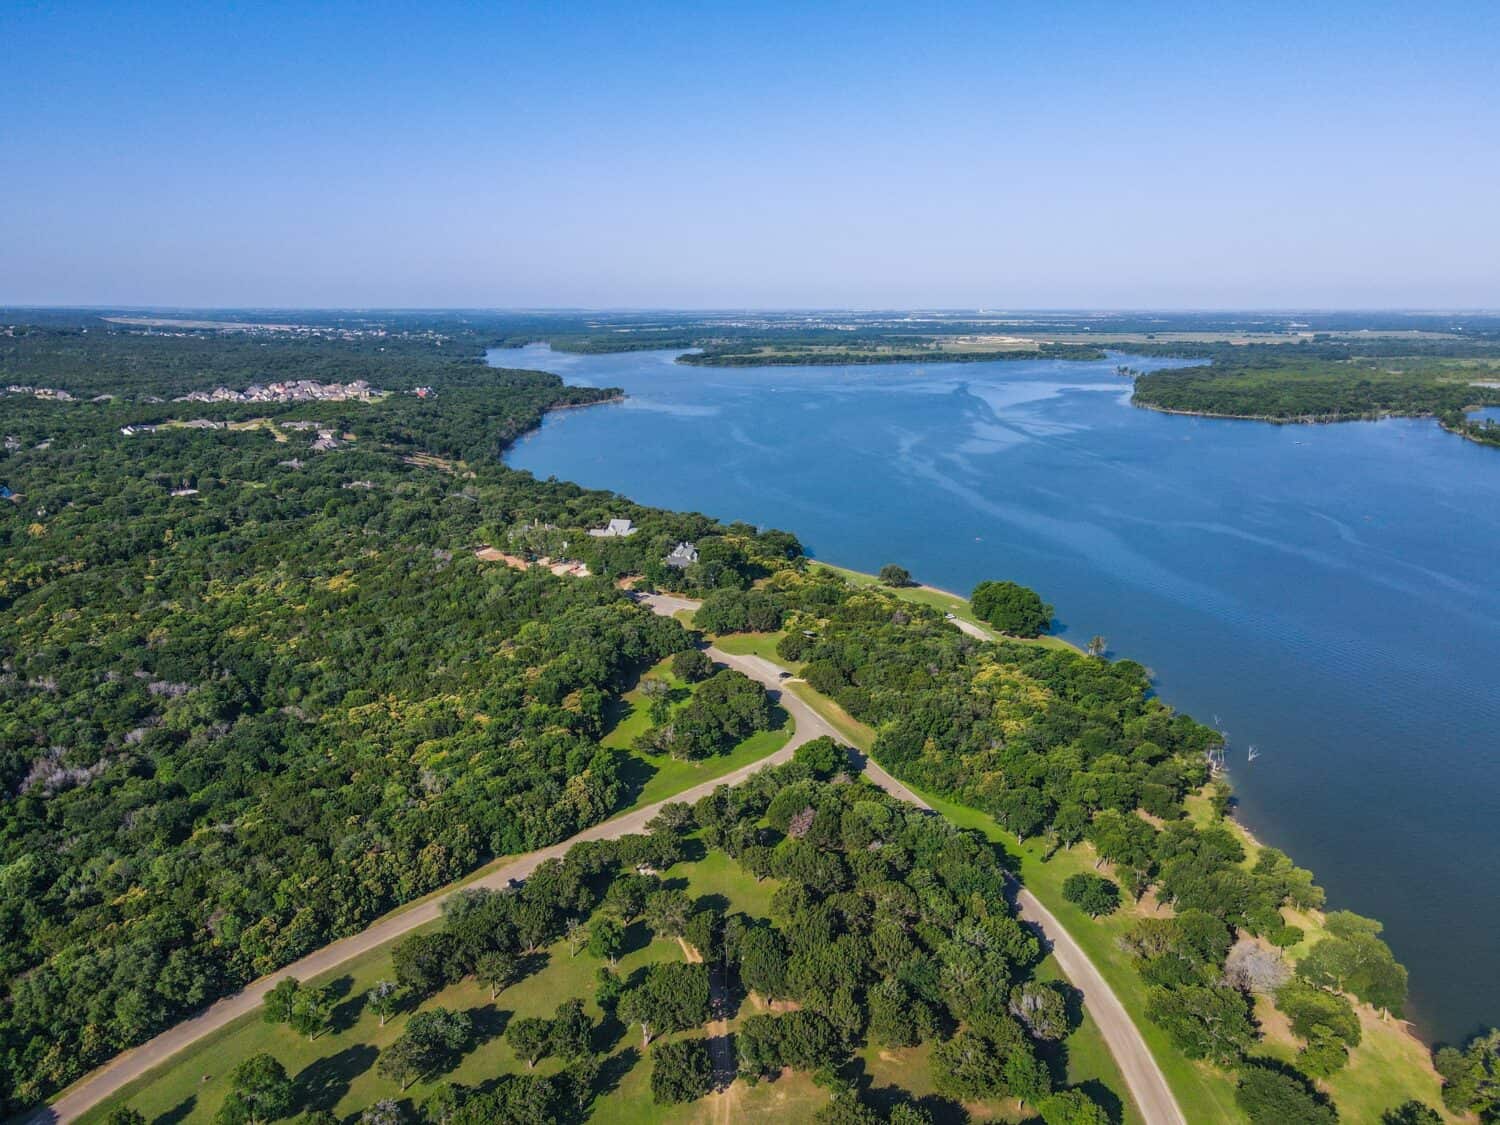 The beautiful aerial view of nature on the shore of Lake Waco in Texas